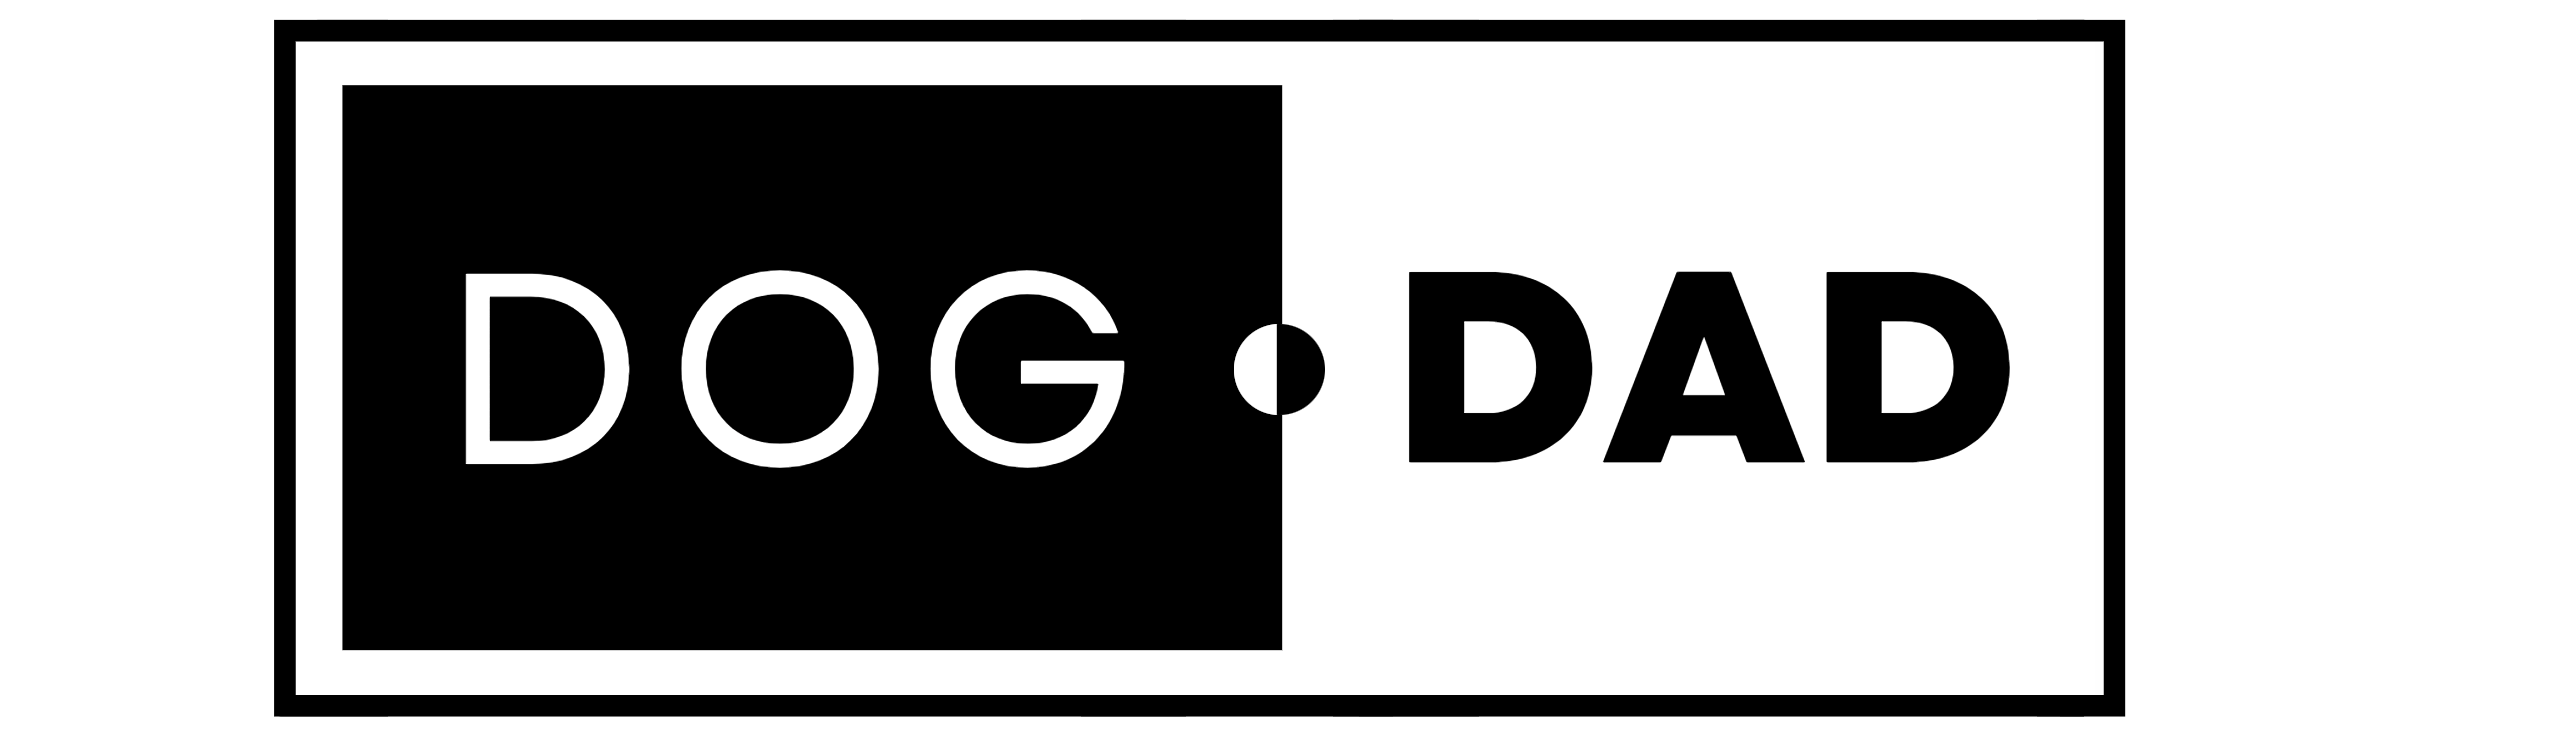 DOG.DAD logo in inverse black and white.